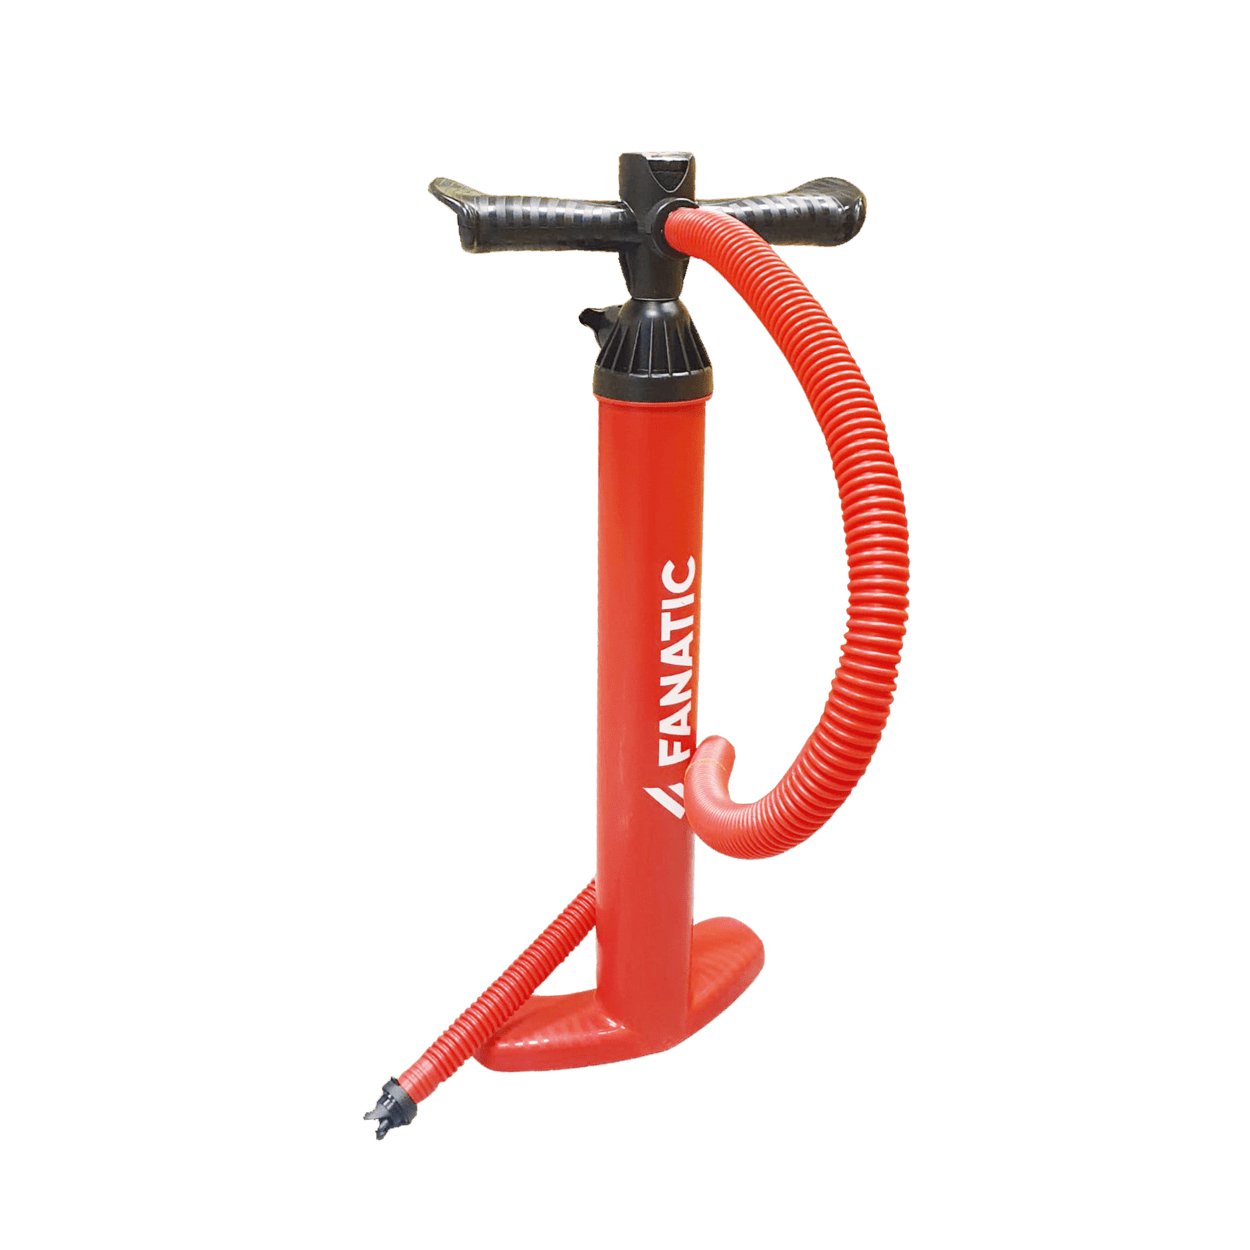 Fanatic Pump Double Action HP8 2024 - Worthing Watersports - 9008415970445 - Accessories - Fanatic SUP